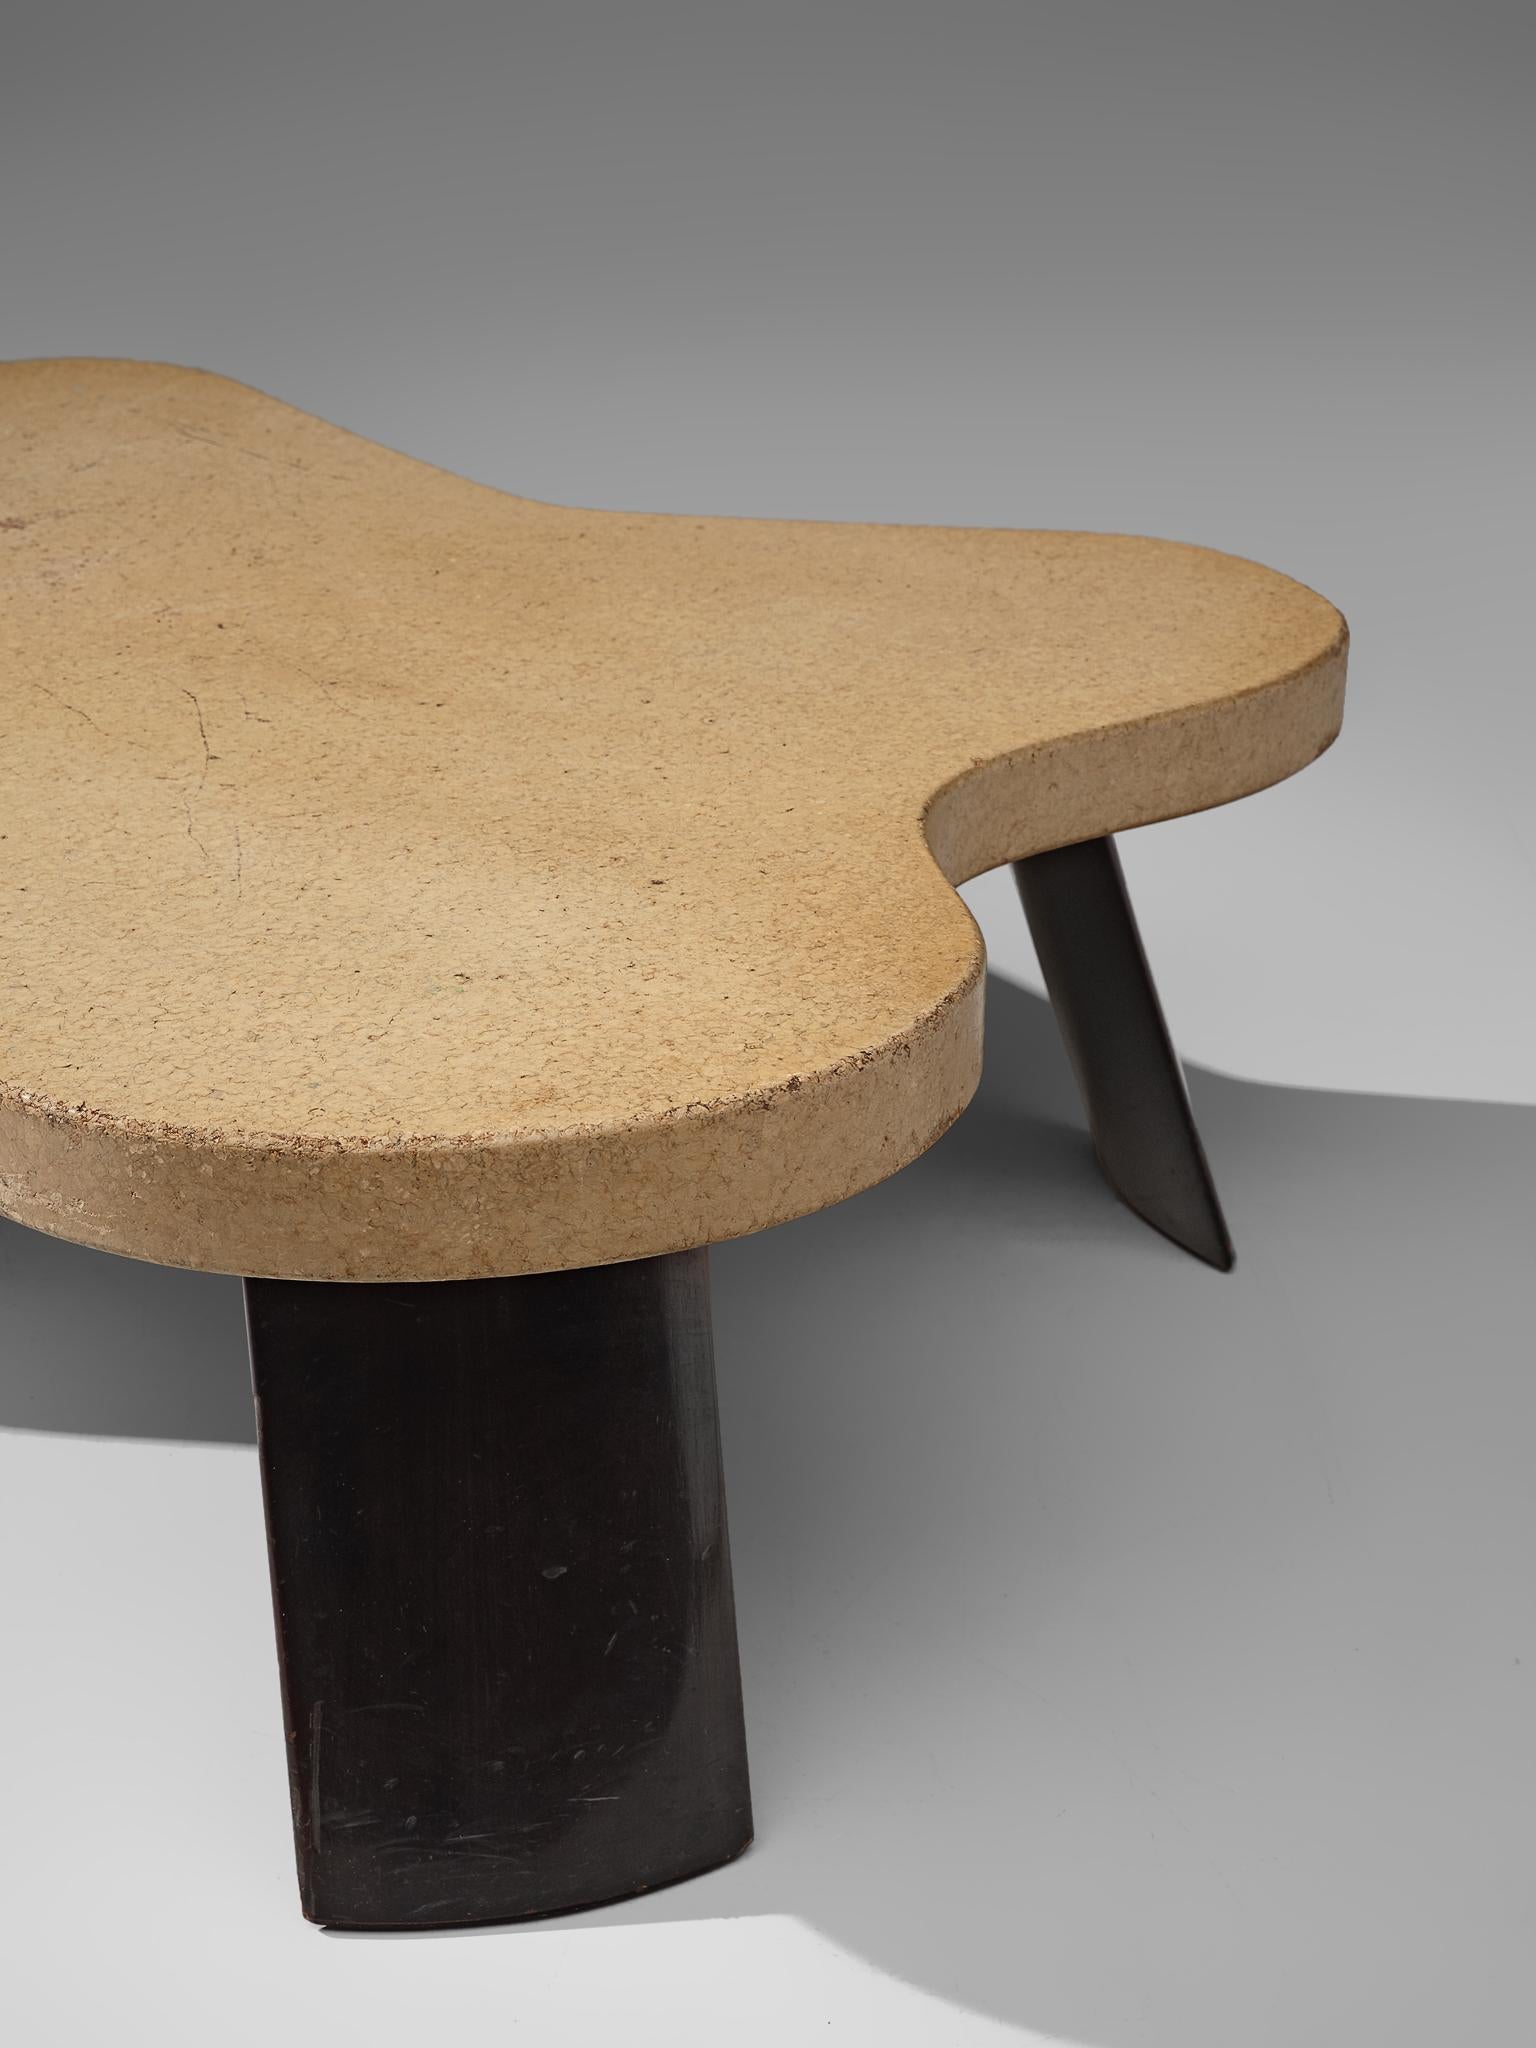 Mid-20th Century Paul T. Frankl Cocktail Table in Cork and Mahogany, United States, circa 1951